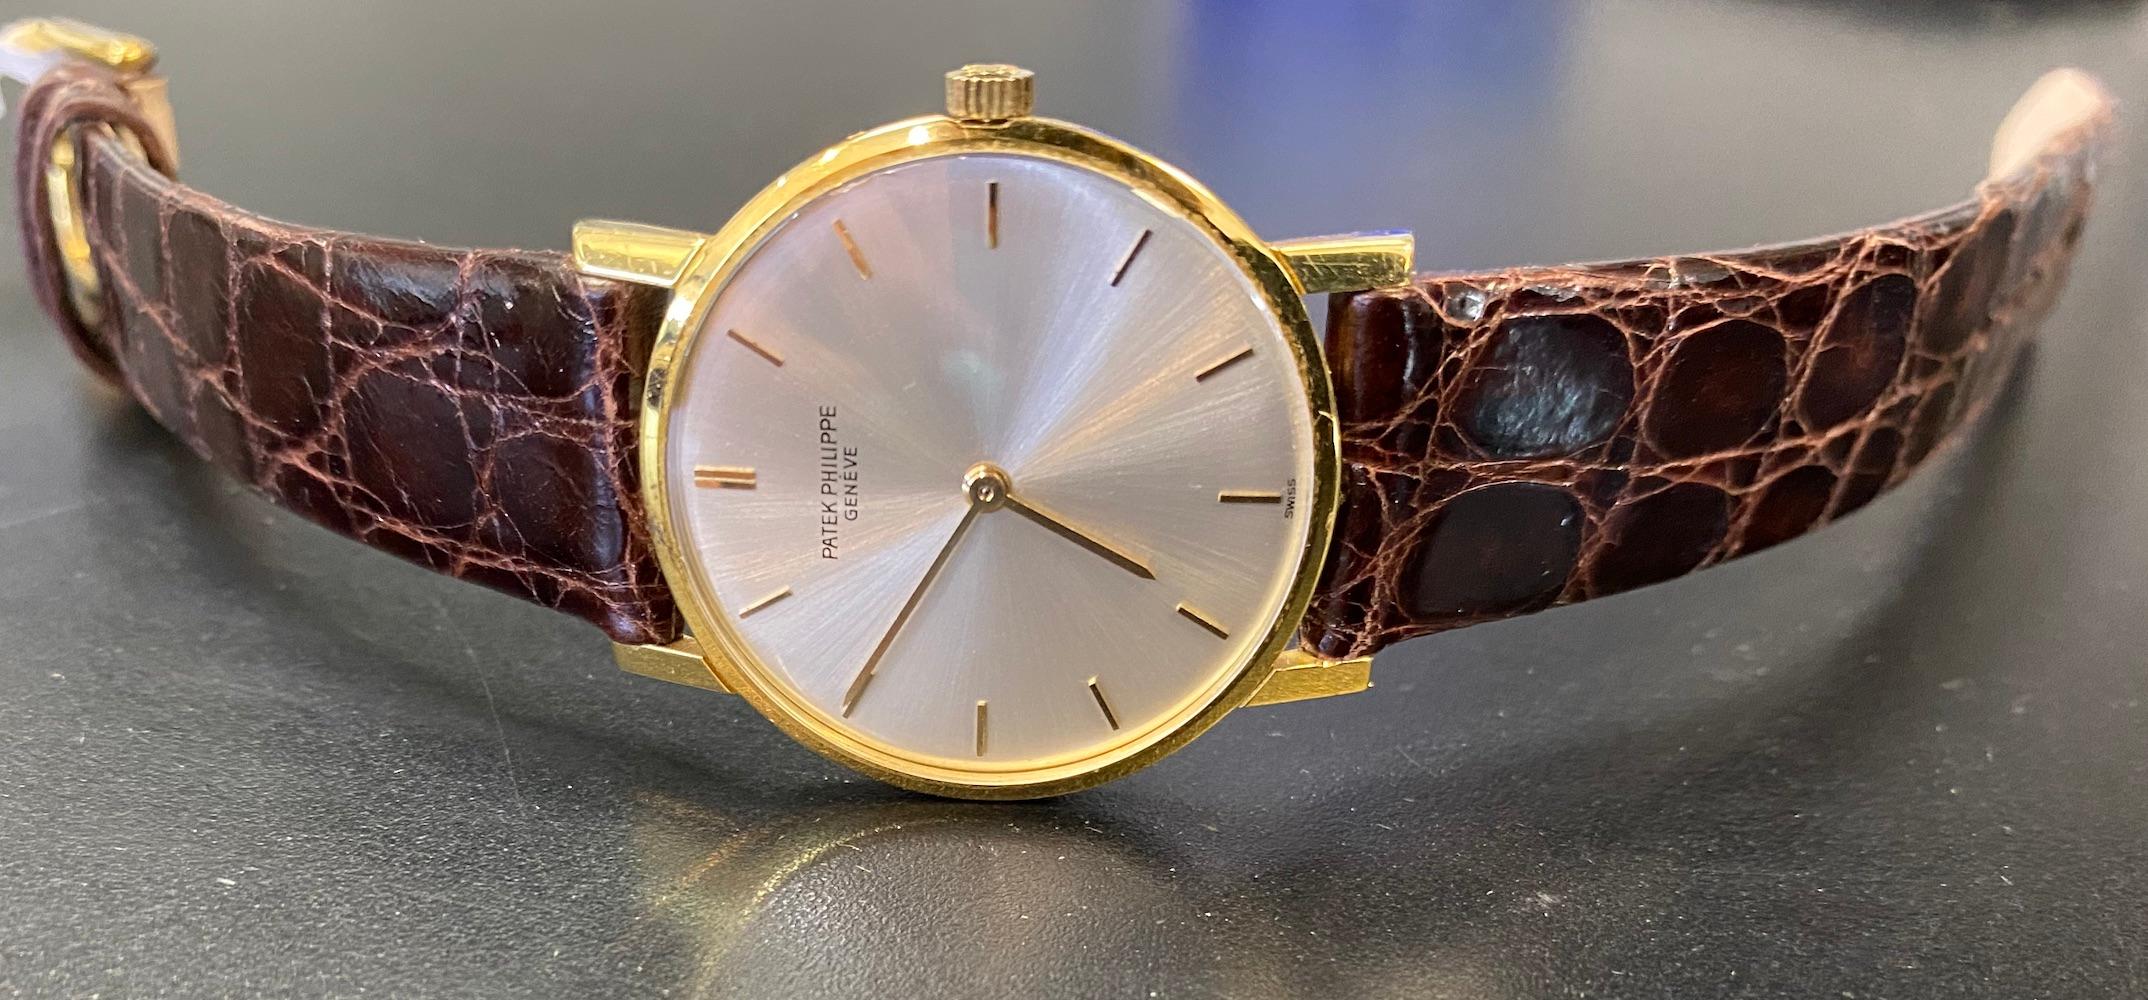 This timeless and fine Patek Philippe Watch is from a fine esate.
The size is 28m in diameter.
The movement is a Manual Wind 
Case is 18 Karat Yellow Gold 

Model no: 3470
Vintage watch with smooth classic bezel and lugs is estimated to be from the